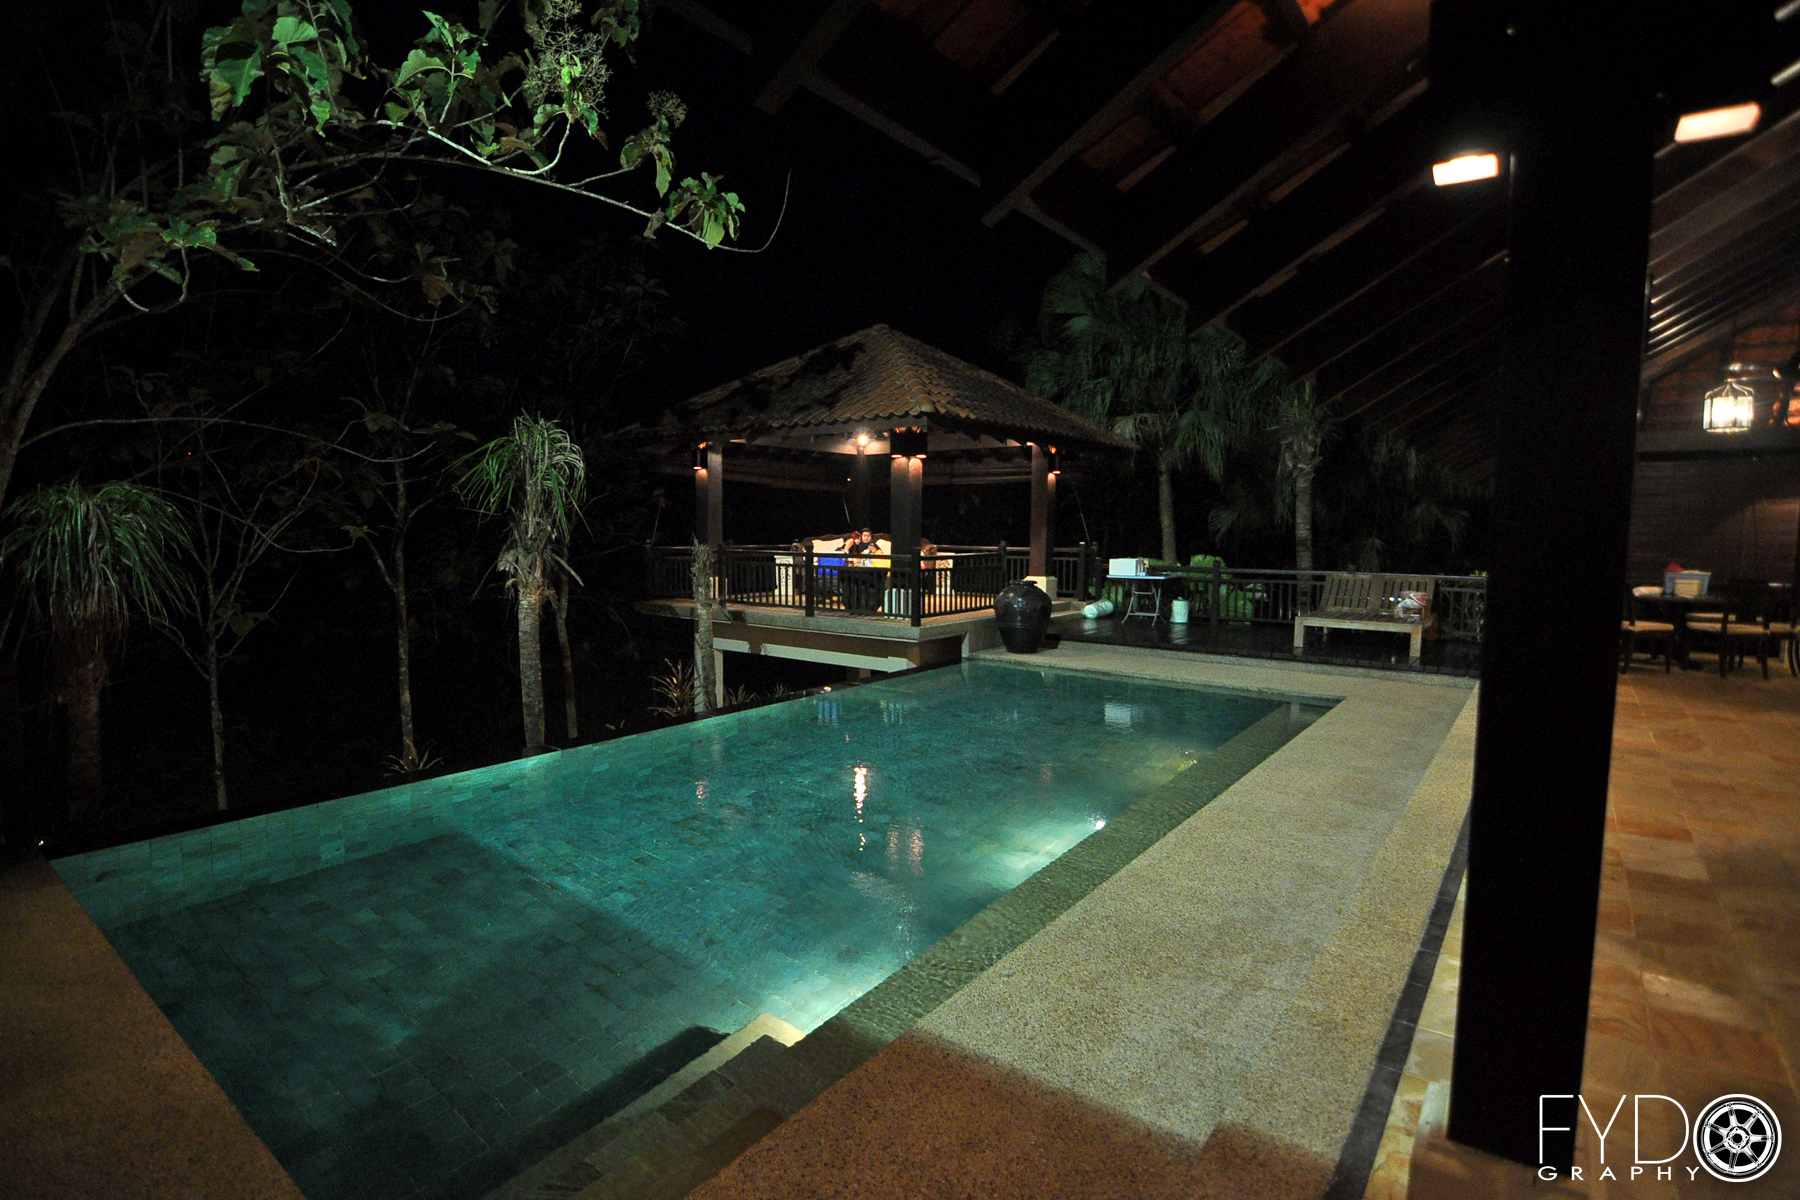 Homestay with private pool hulu langat